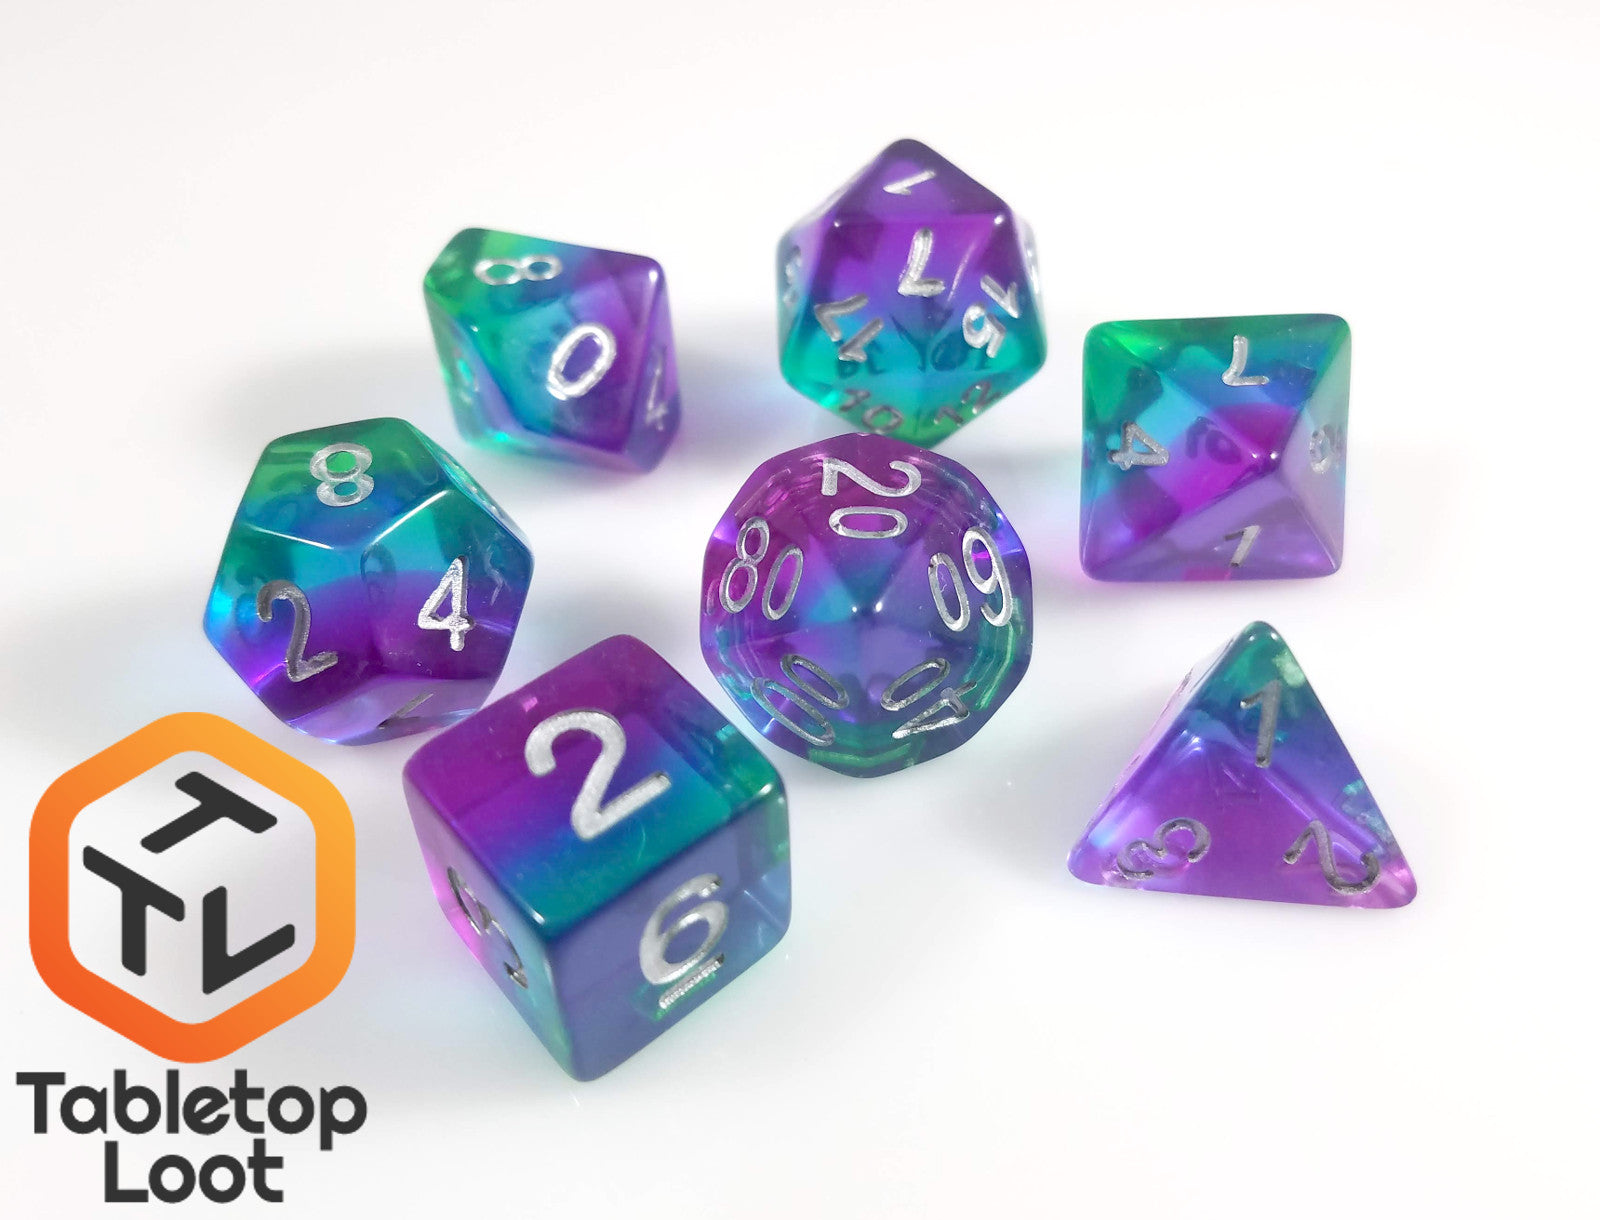 The Crystalline Fluorite 7 piece dice set from Tabletop Loot with layers of green, blue, and purple resin and silver numbering.